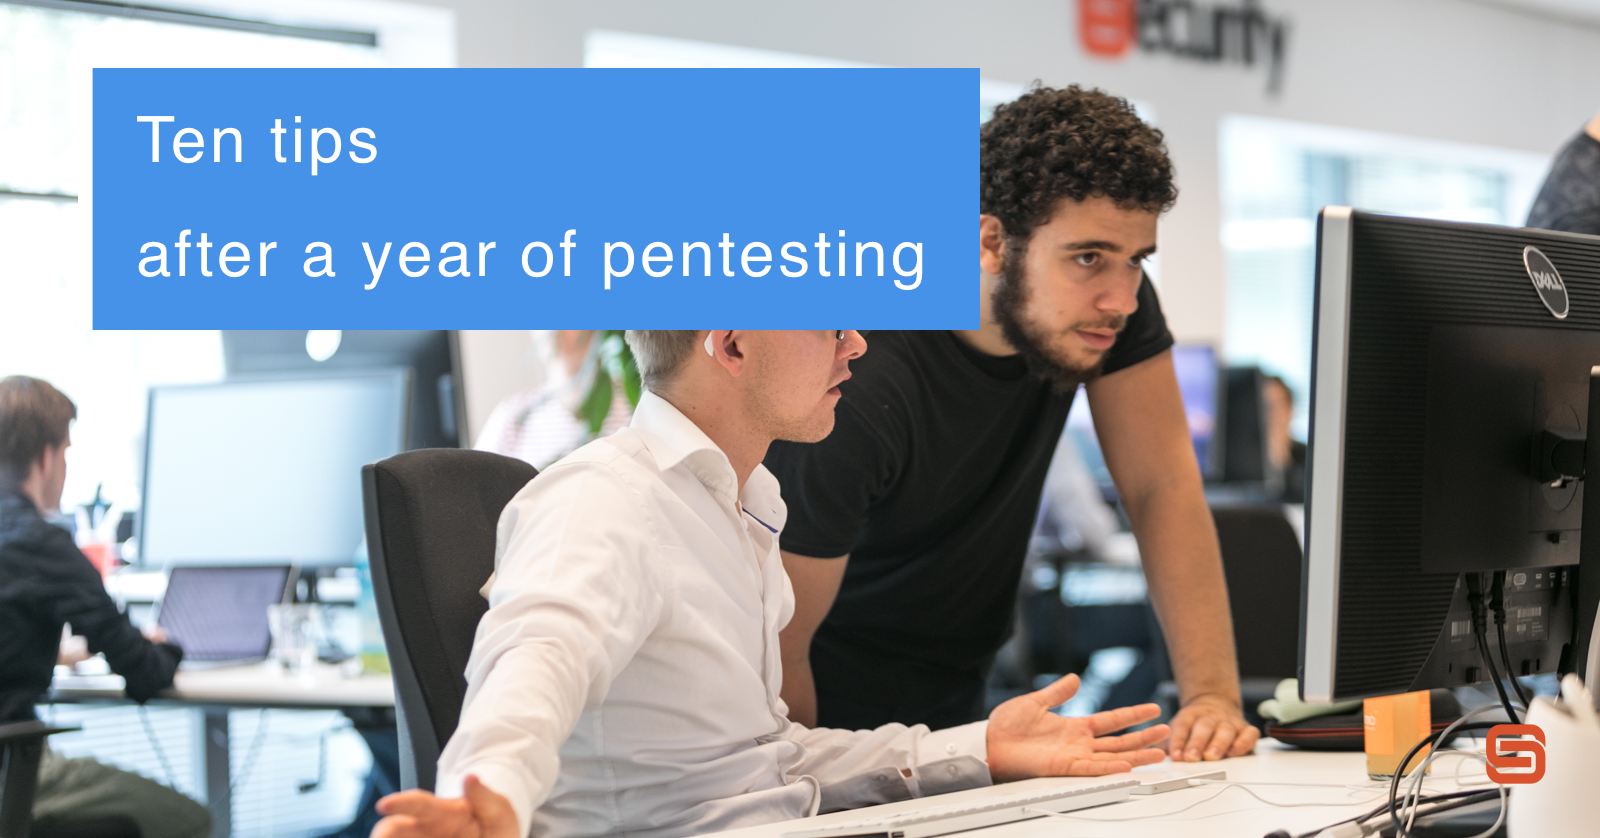 Ten tips after a year of pentesting